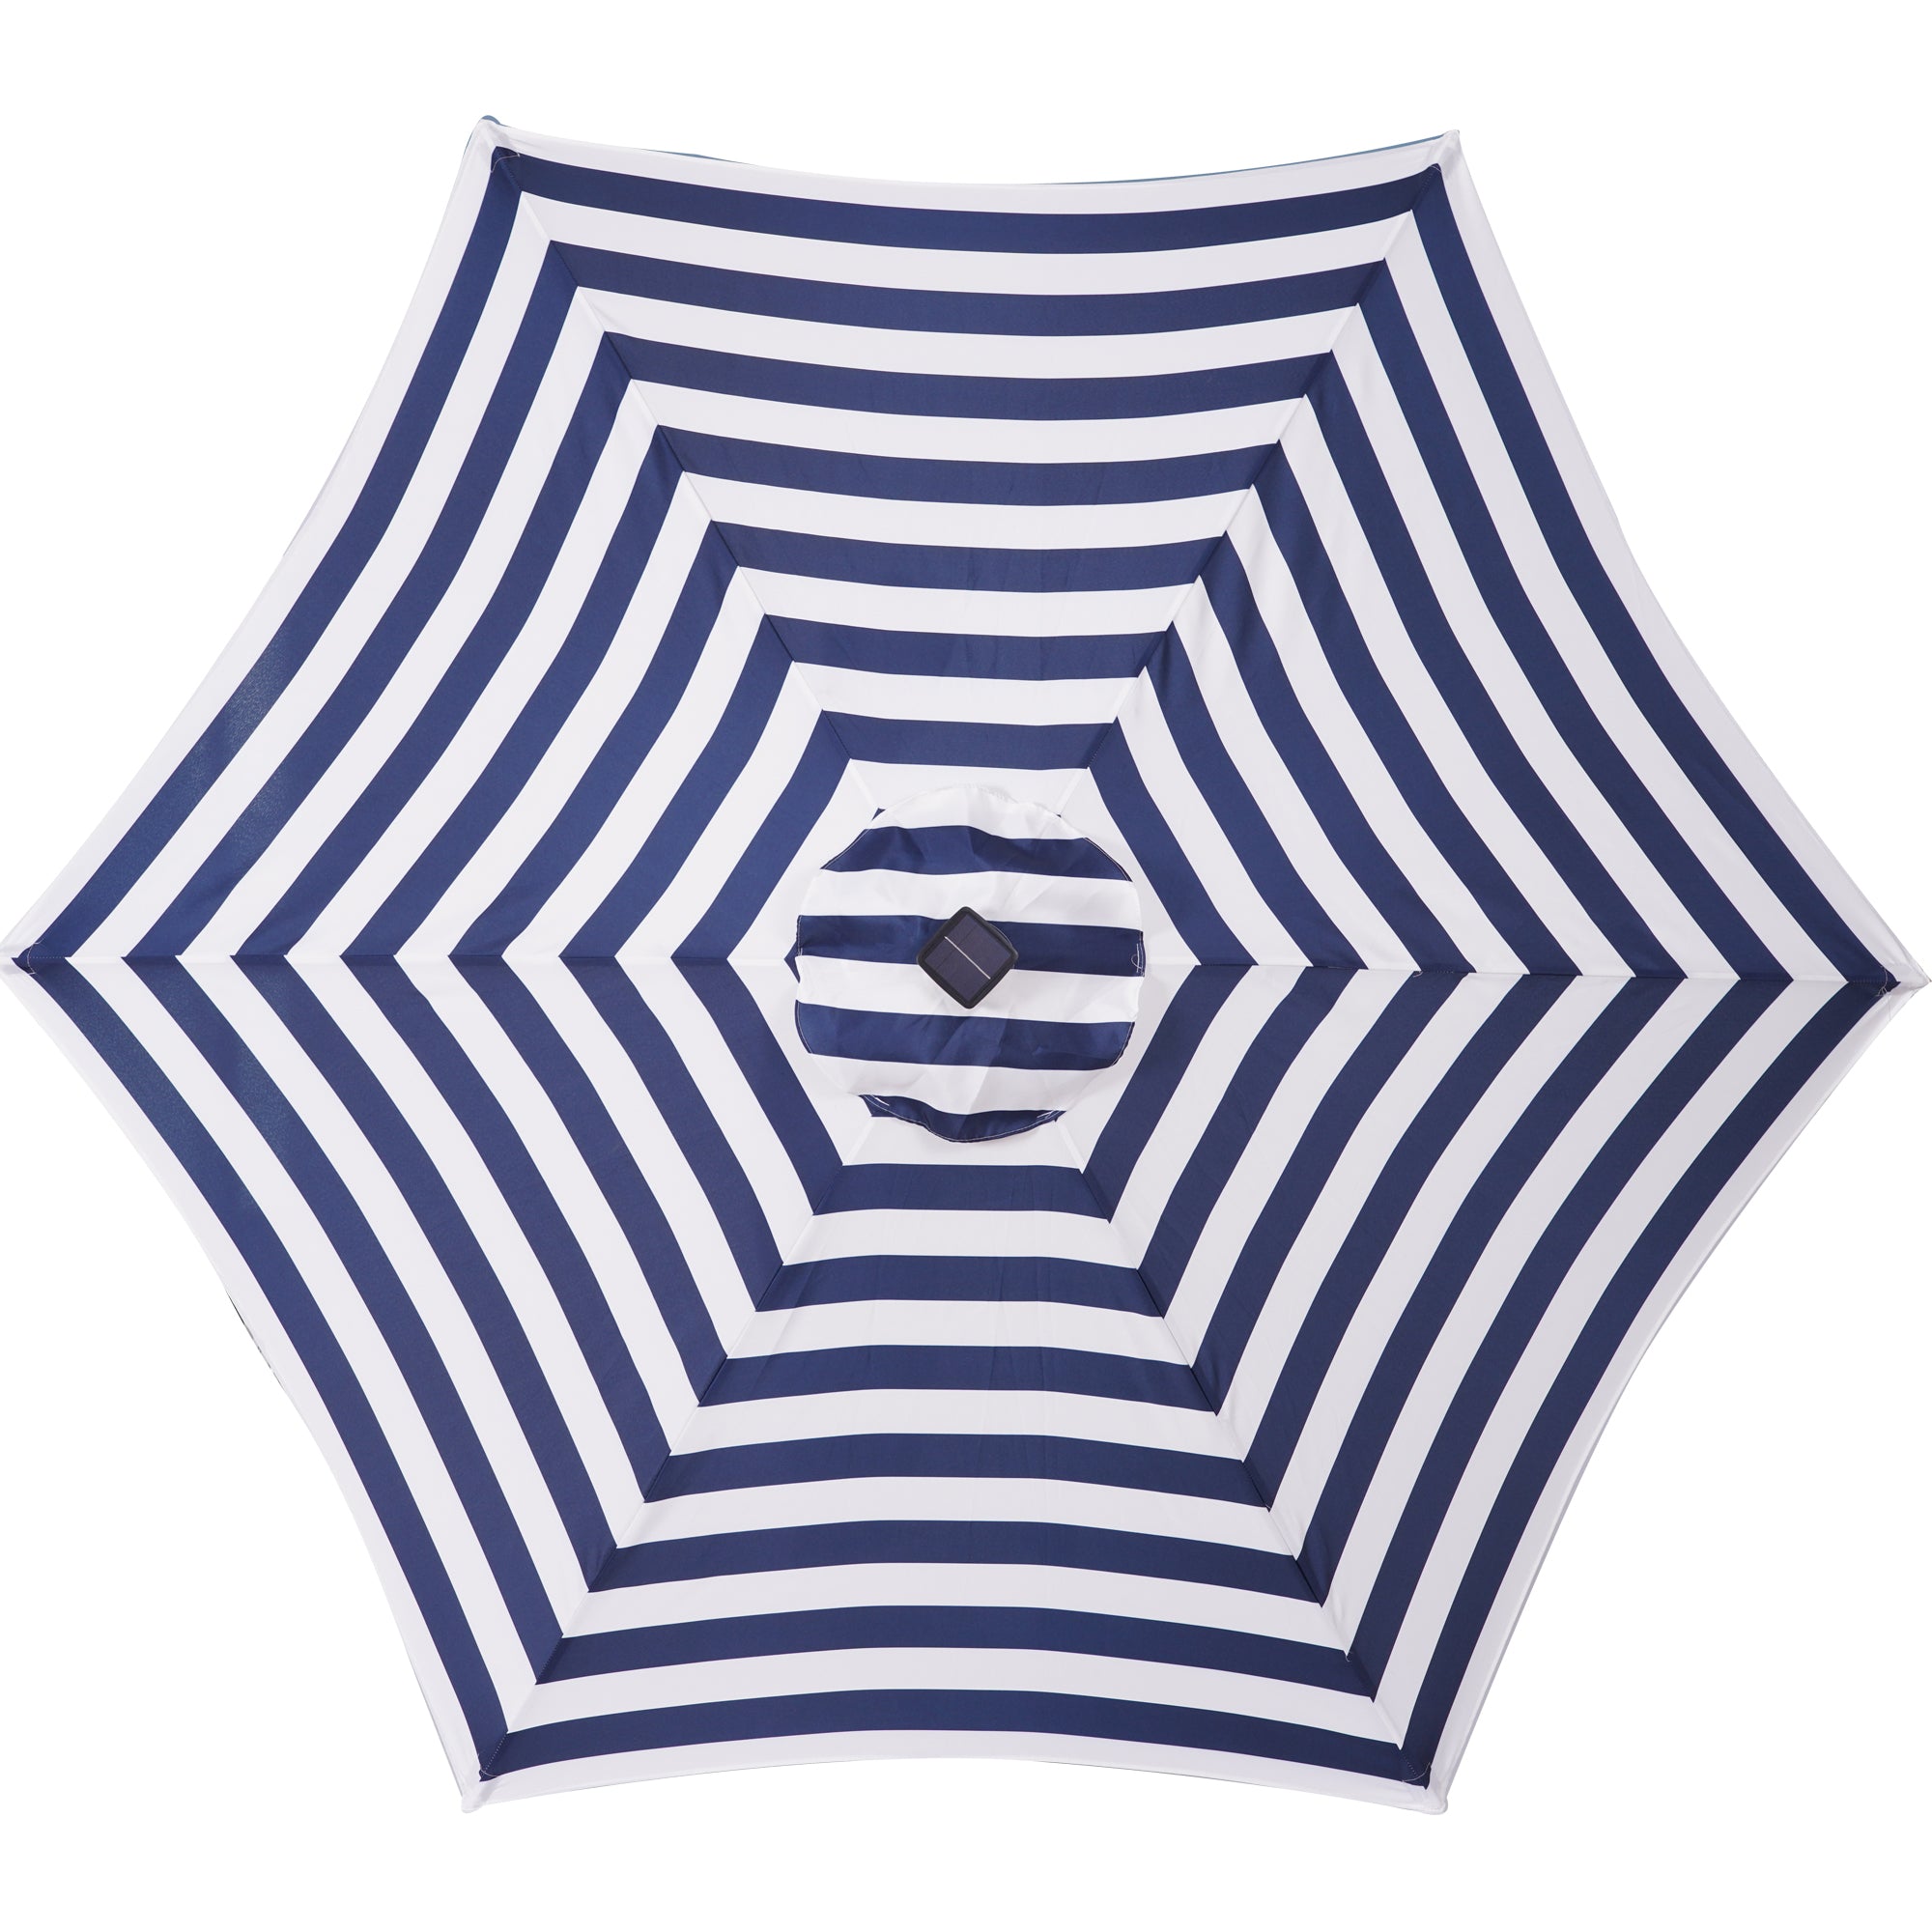 Carevas Outdoor Patio 8.7-Feet Market Table Umbrella with Push Button Tilt and Crank, Blue White Stripes With 24 Lights[Umbrella Base is not Included]